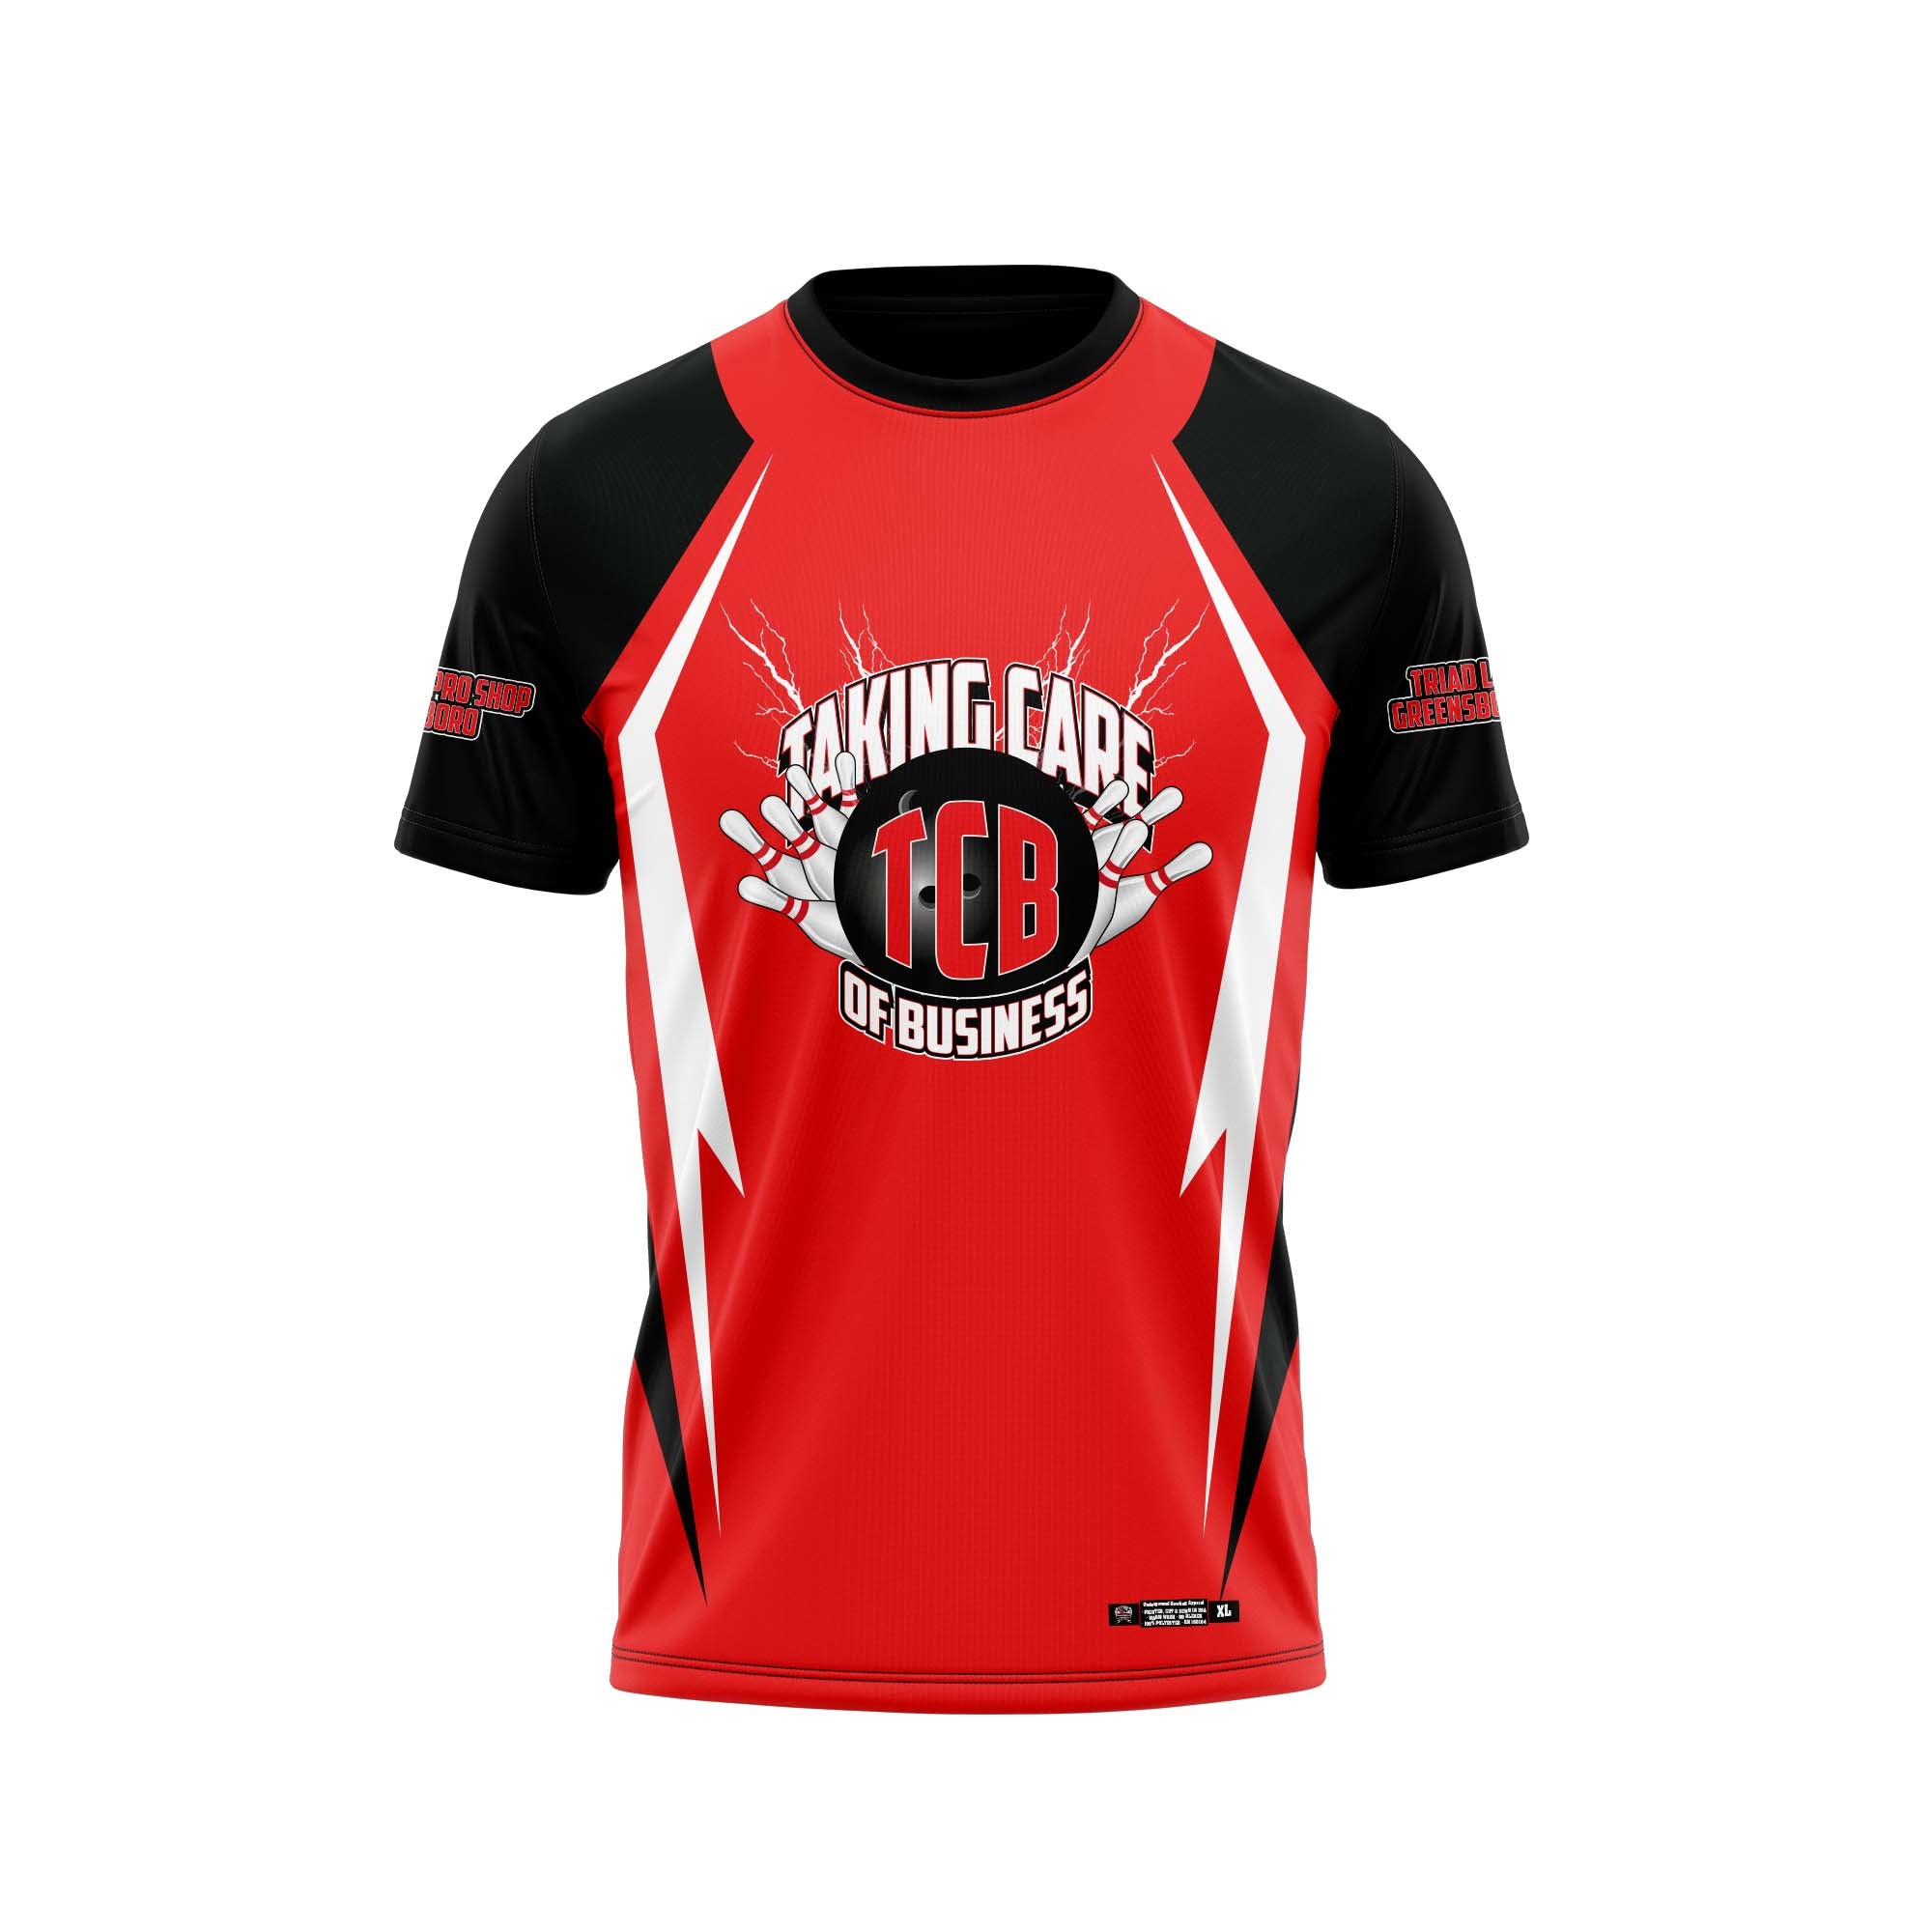 Taking Care Of Business Black Jersey